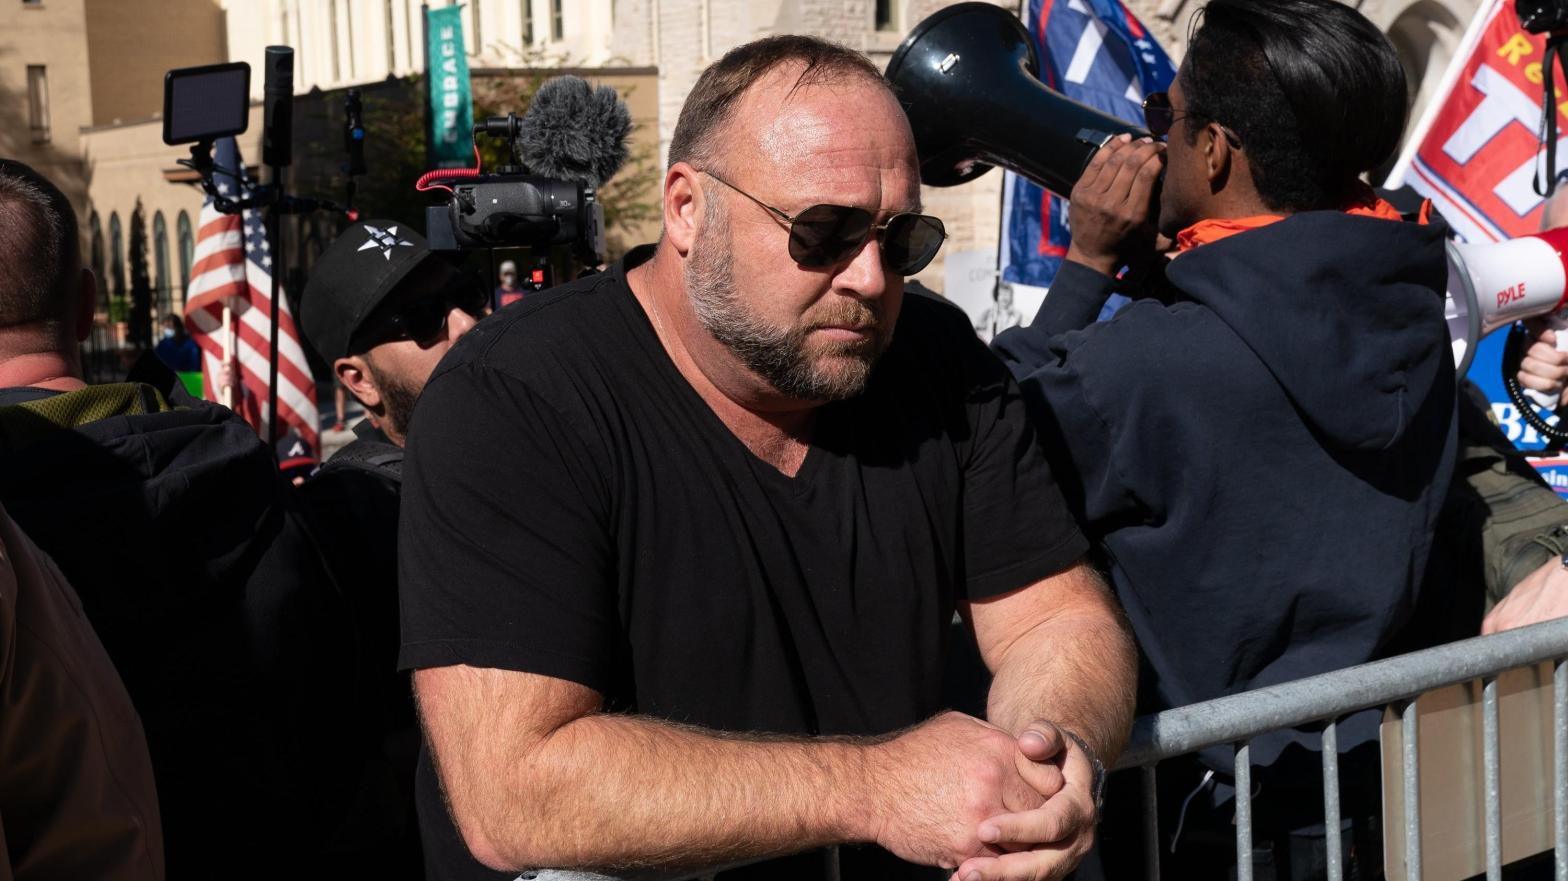 Alex Jones has a large media empire including a podcast and online store, but he also has some other side projects he himself claimed ownership for. (Photo: Elijah Nouvelage, Getty Images)